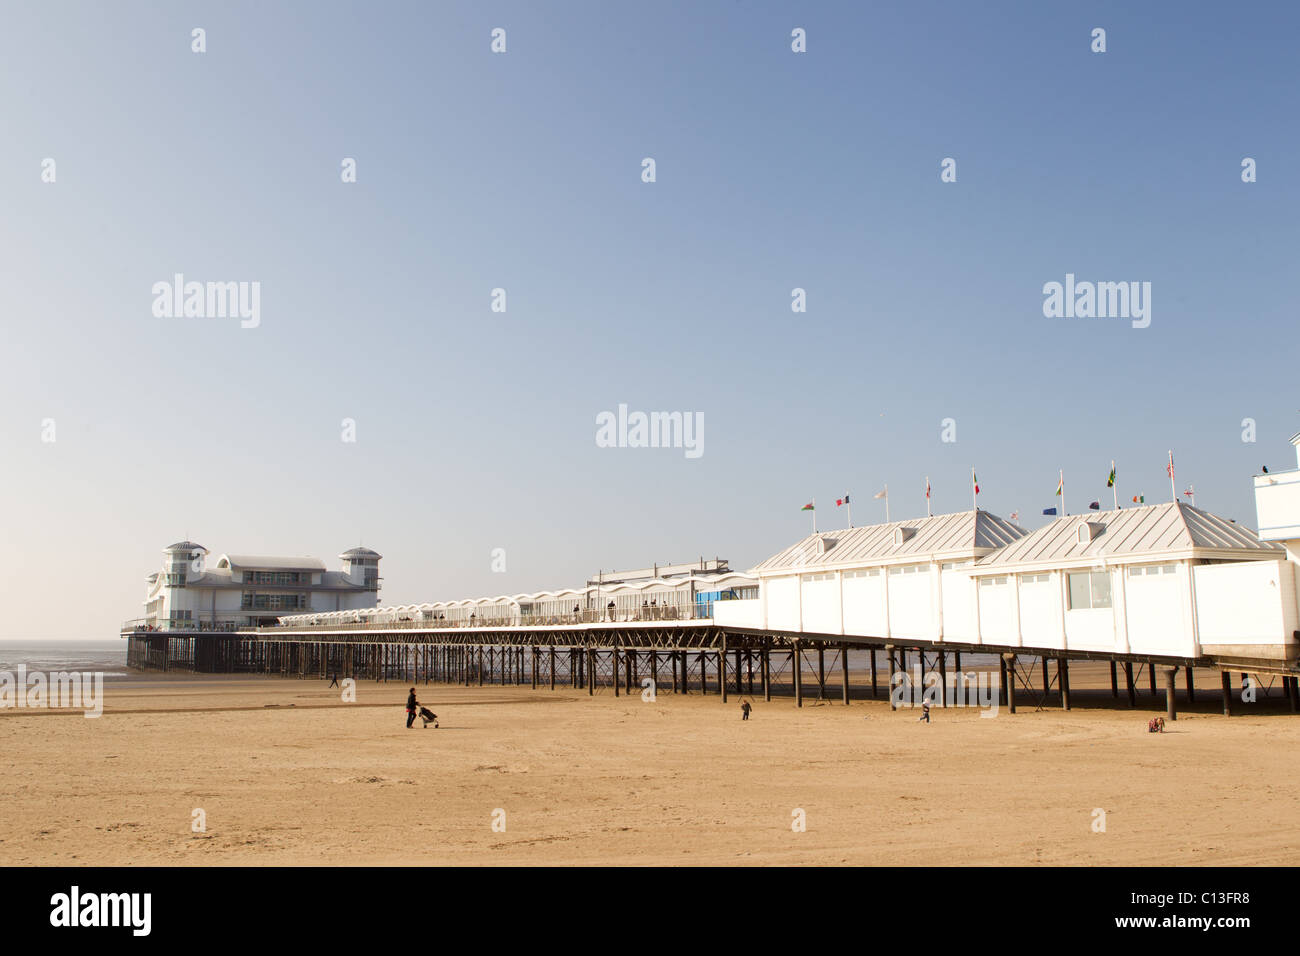 The Newly Opened Weston Super Mare Grand Pier Which Was Rebuilt After A Fire Destroyed The Old